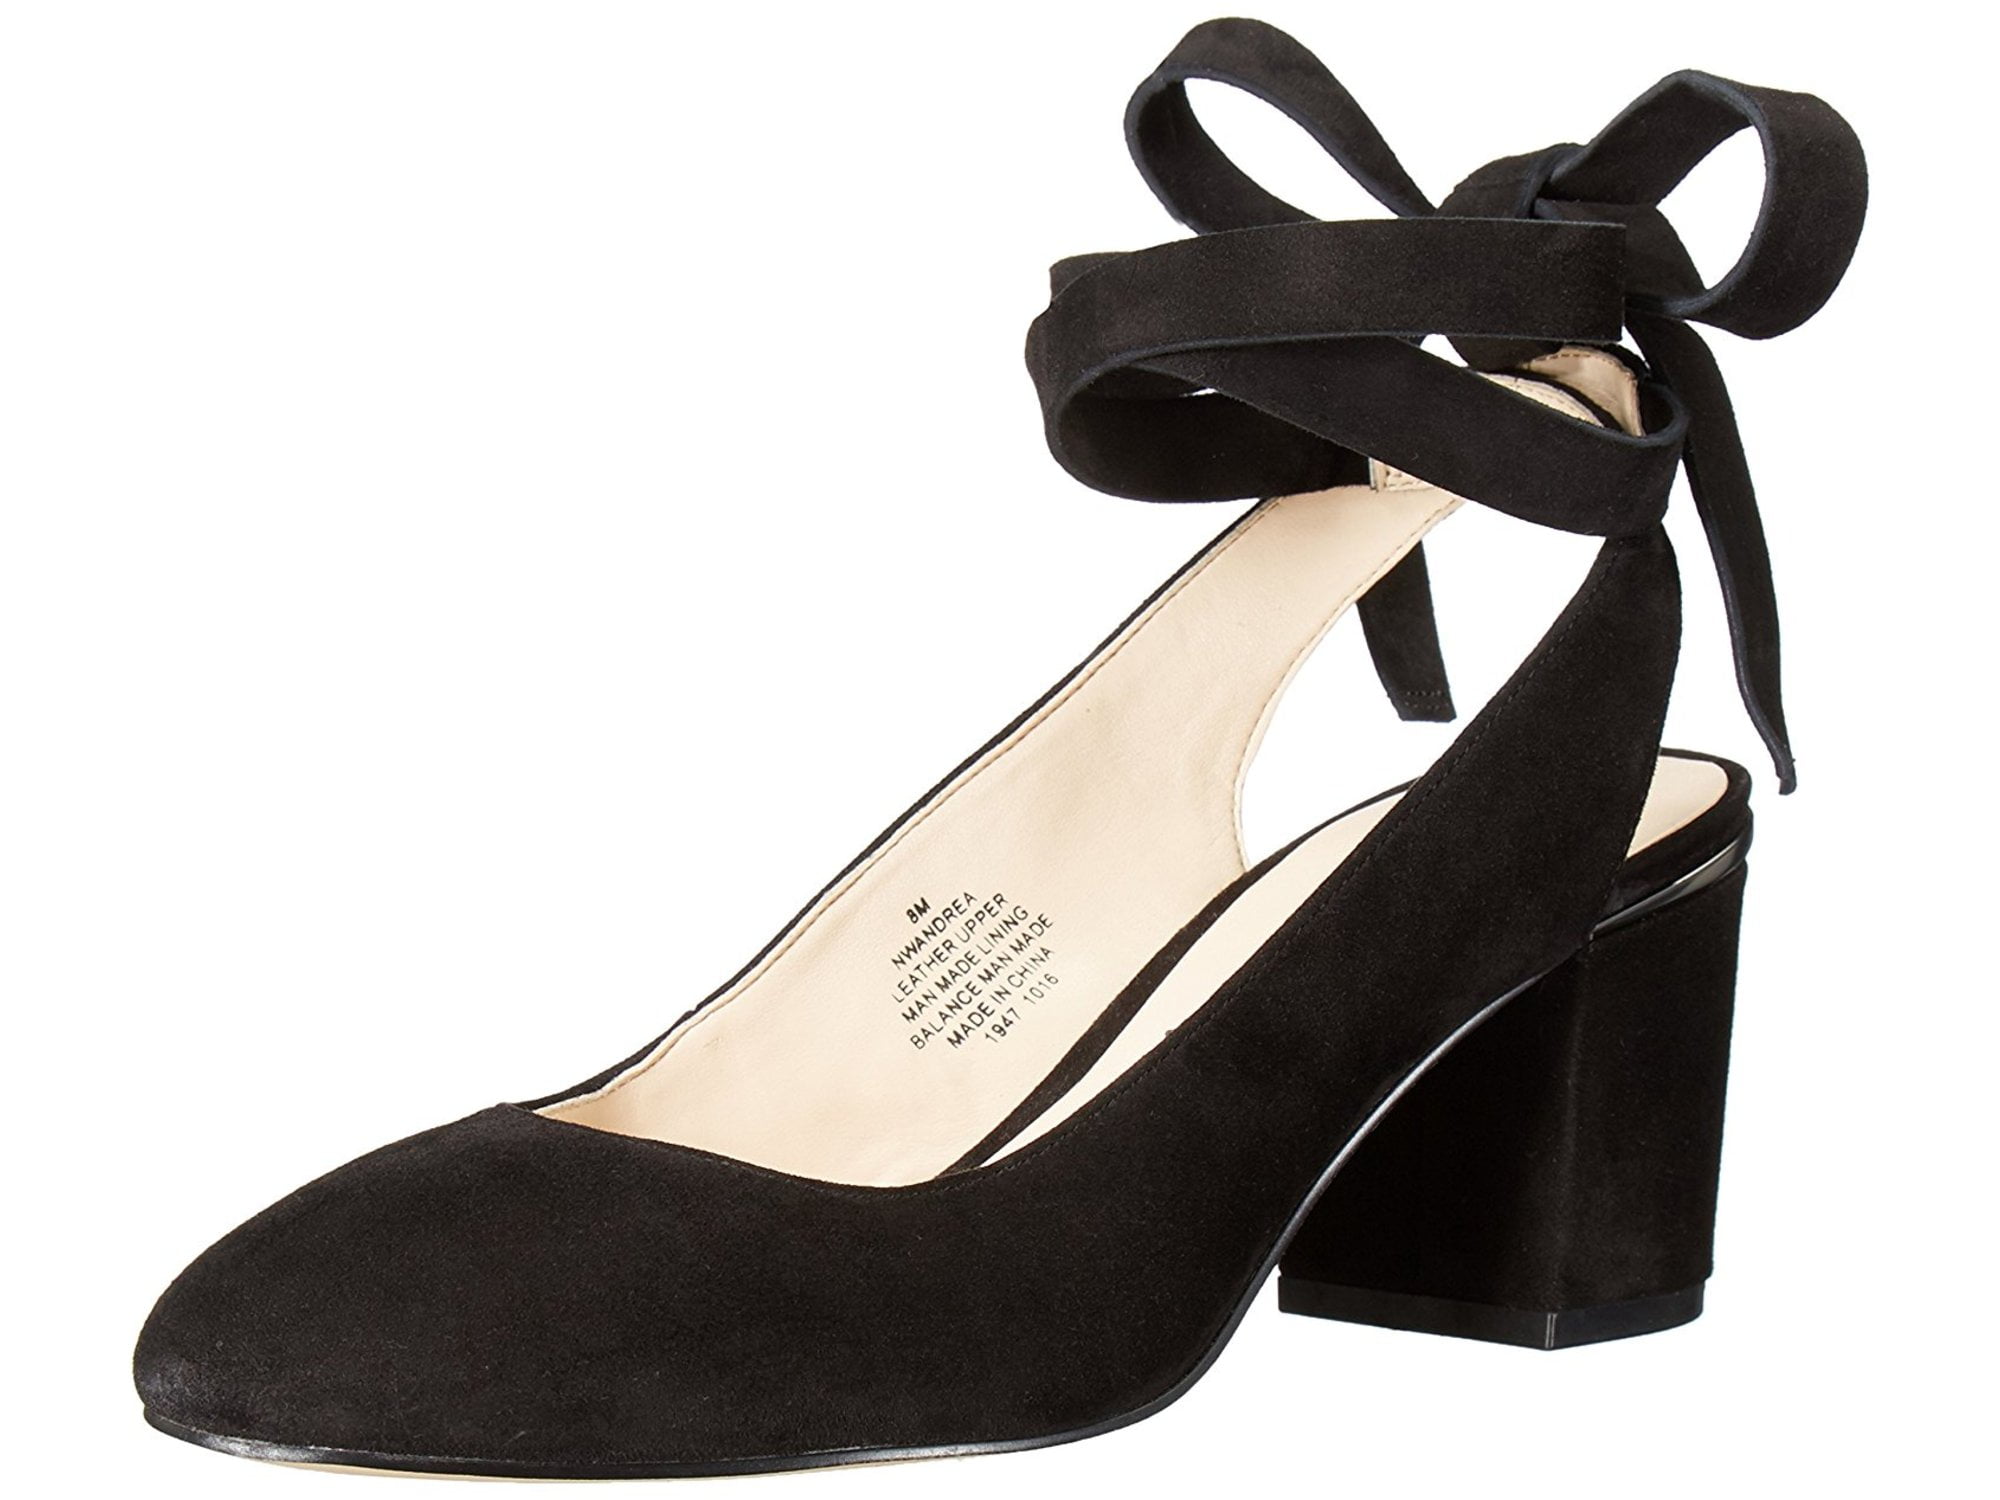 Nine West Women's Andrea Suede Black Ankle-High Leather Pump - 7M ...